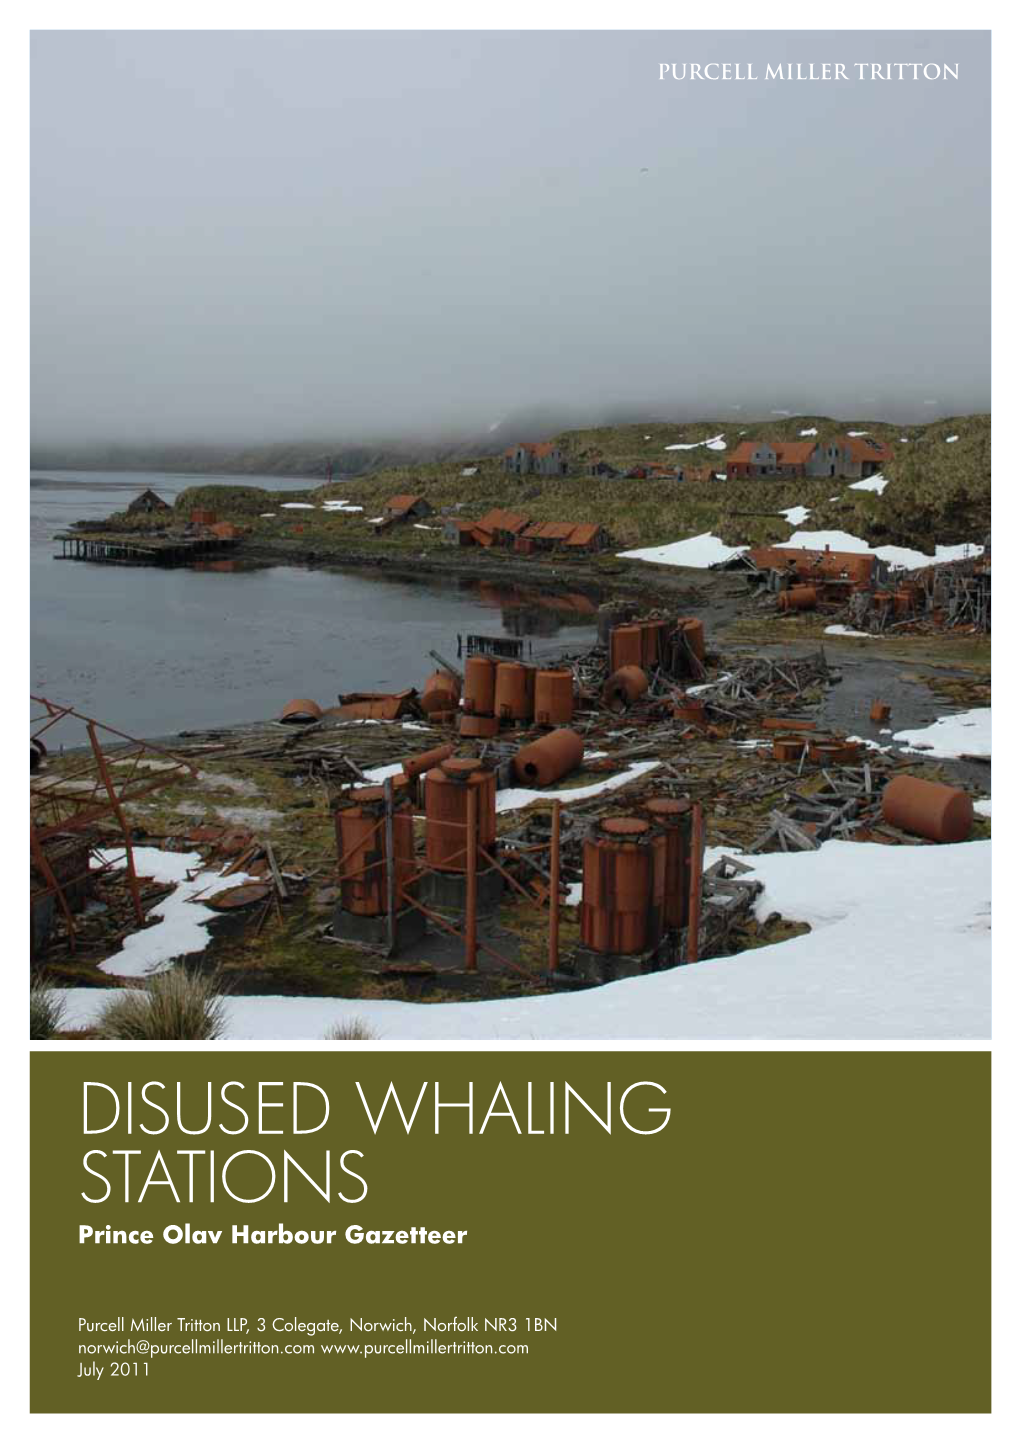 Disused Whaling Stations Prince Olav Harbour Gazetteer